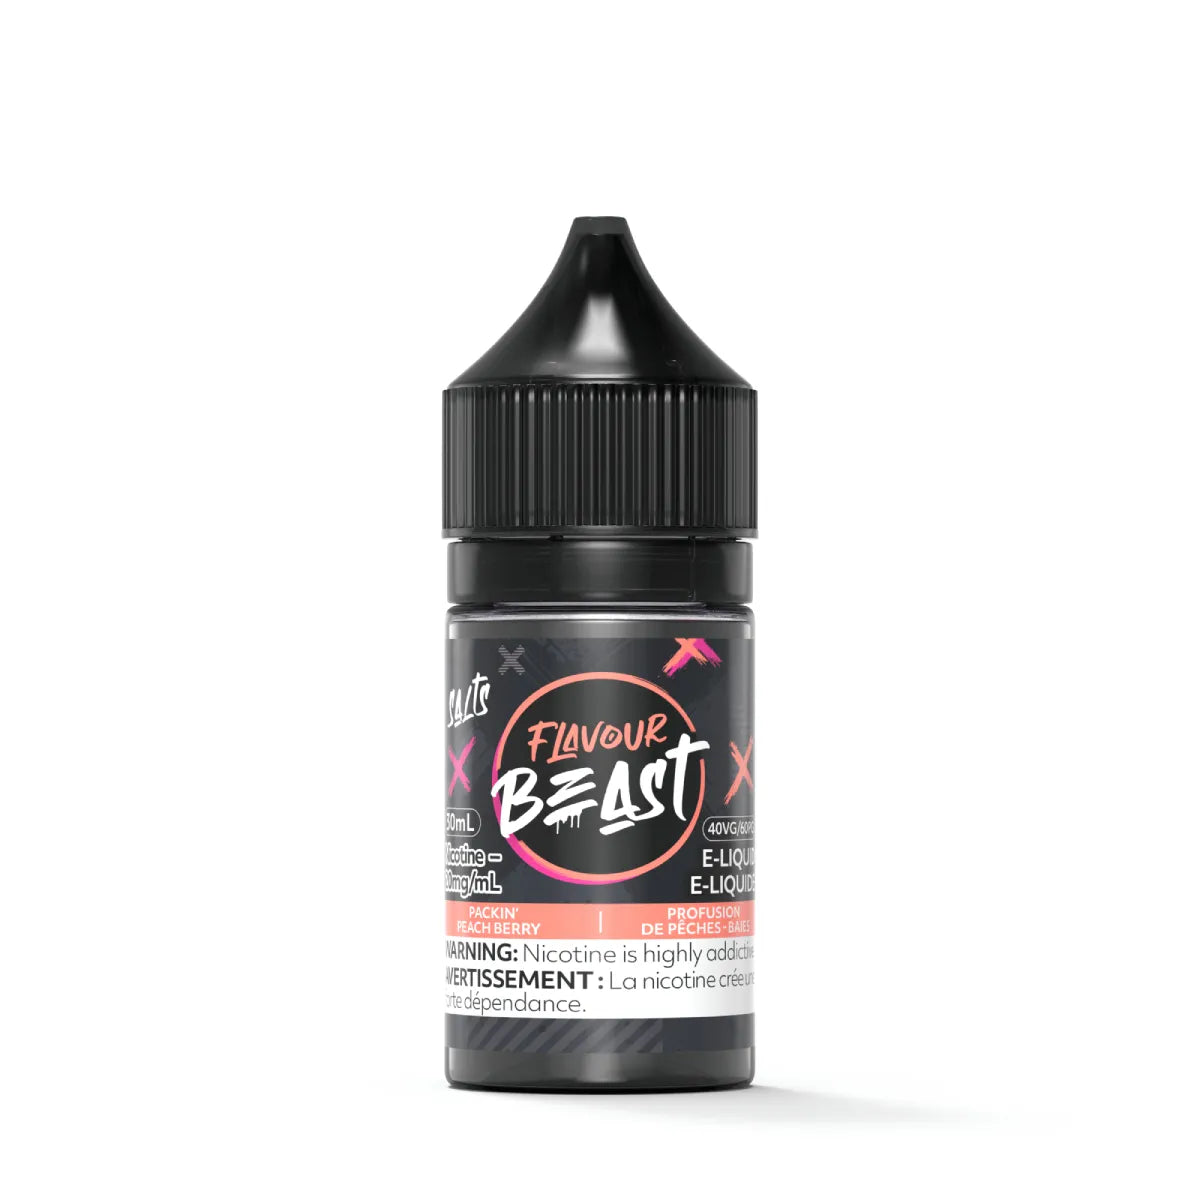 FLAVOUR BEAST PACKIN' PEACH BERRY (Excised)